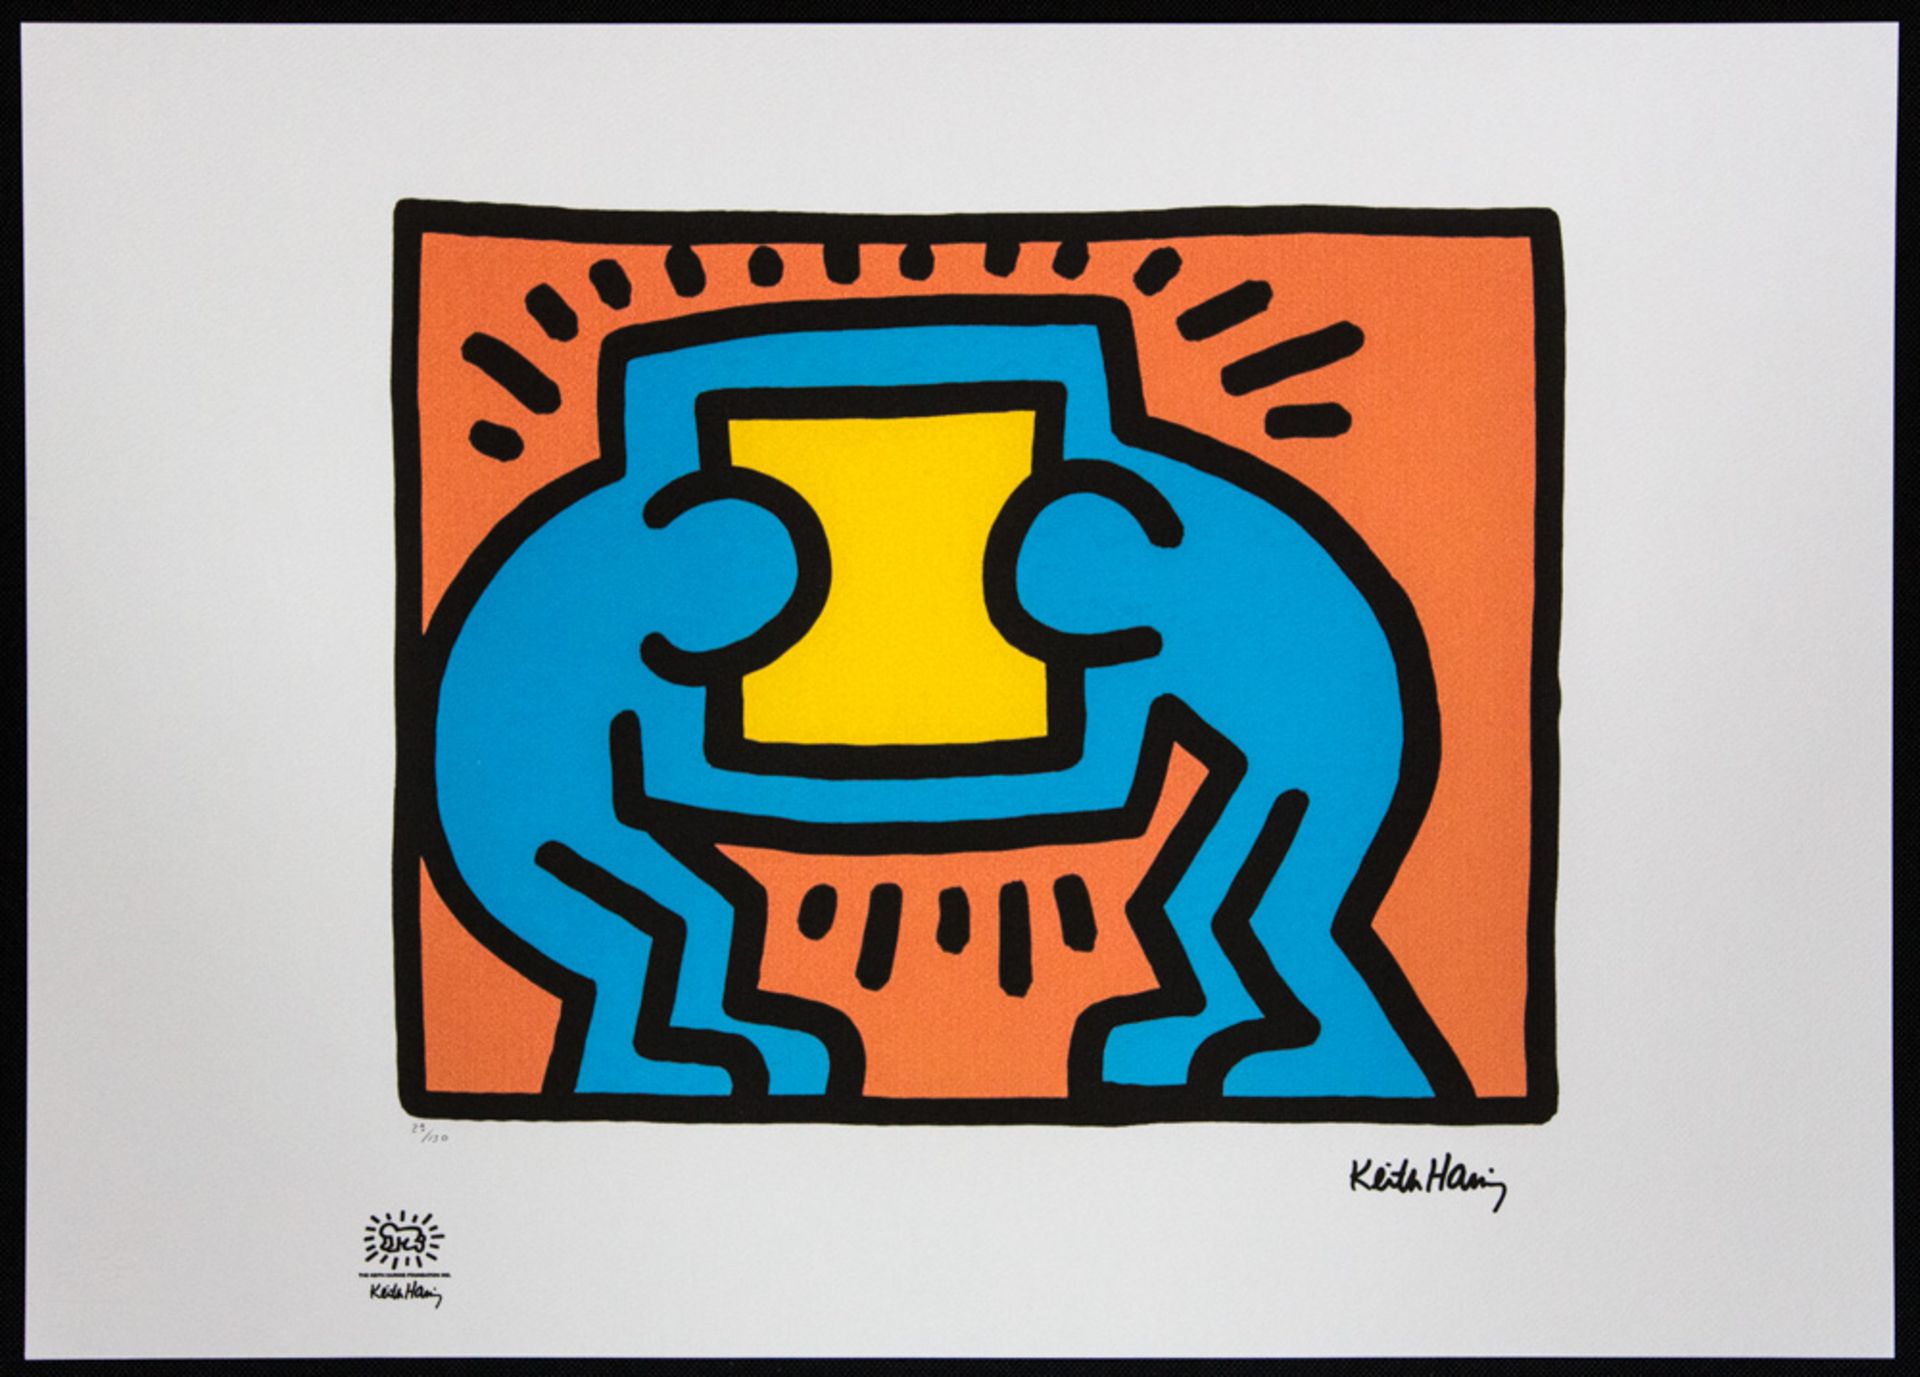 Keith Haring 'Pop Shop' - Image 2 of 6